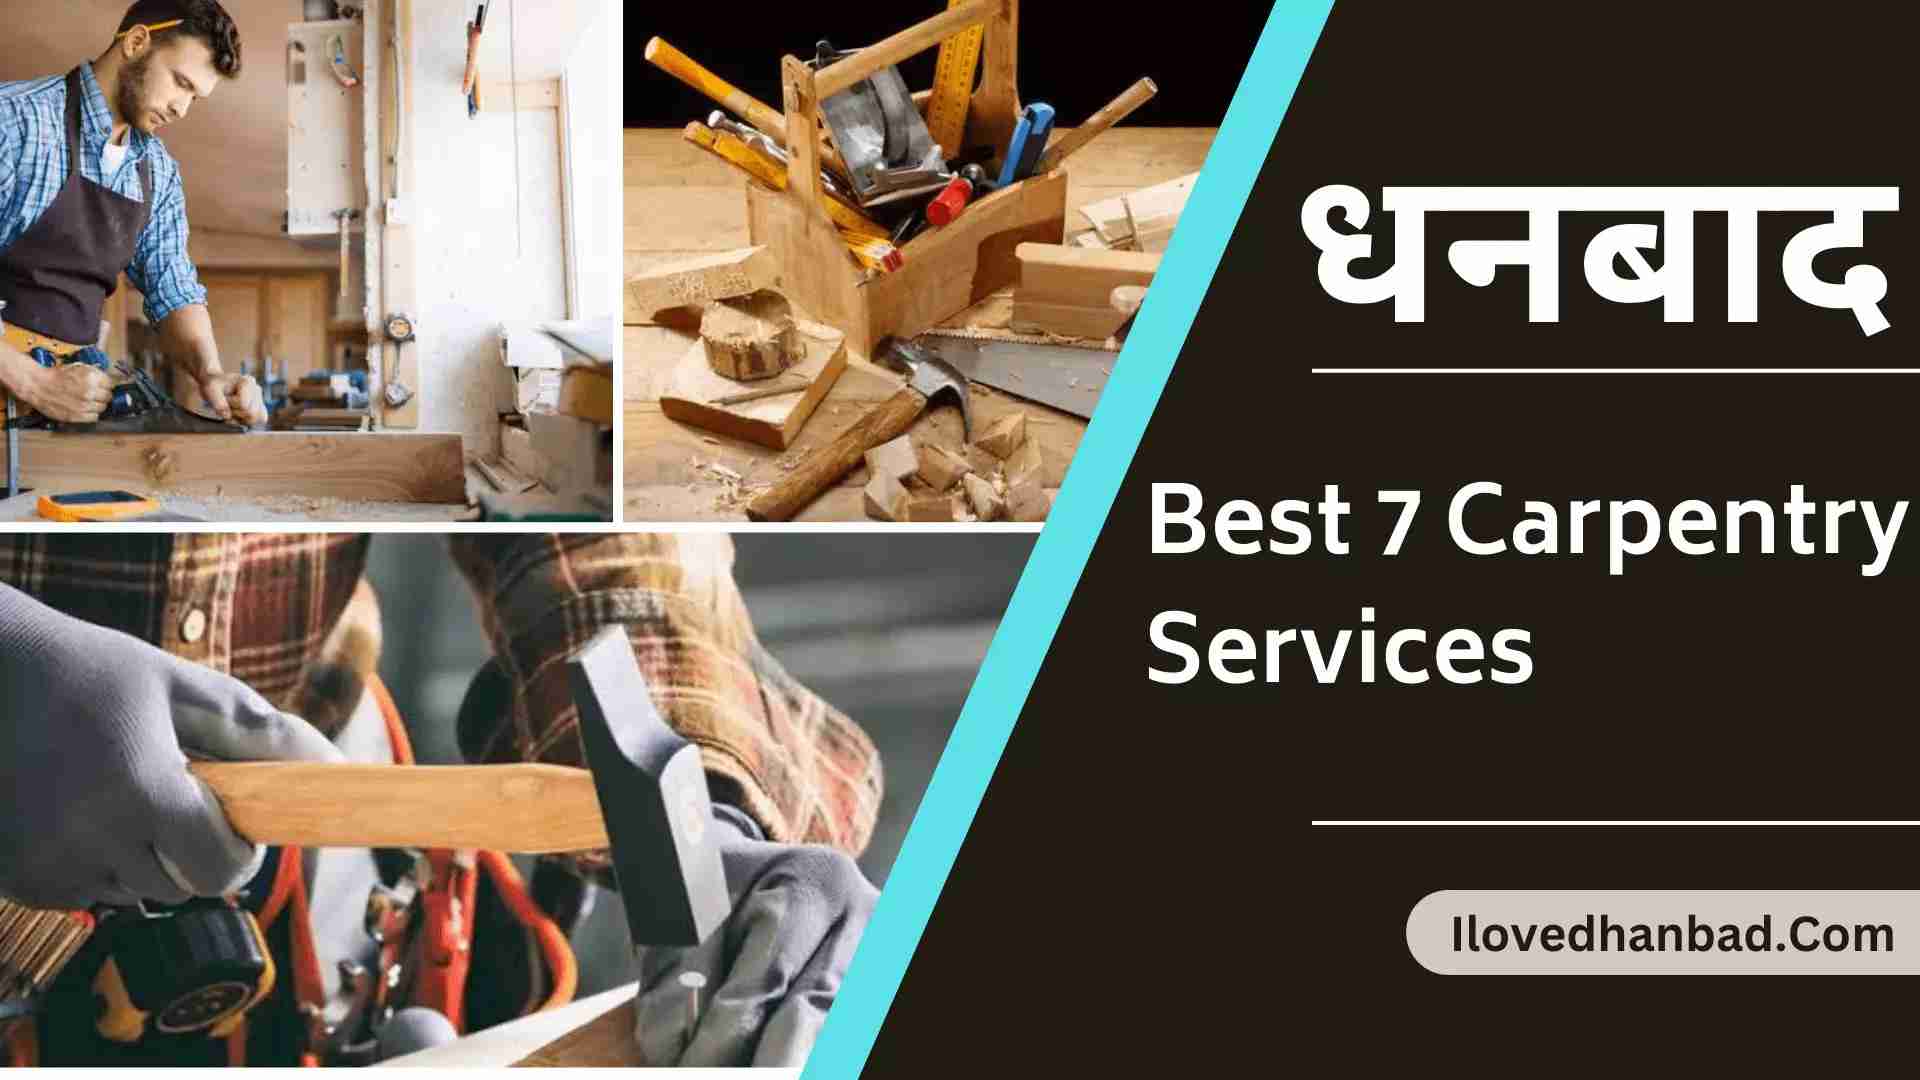 Best 7 Carpentry Services in Dhanbad